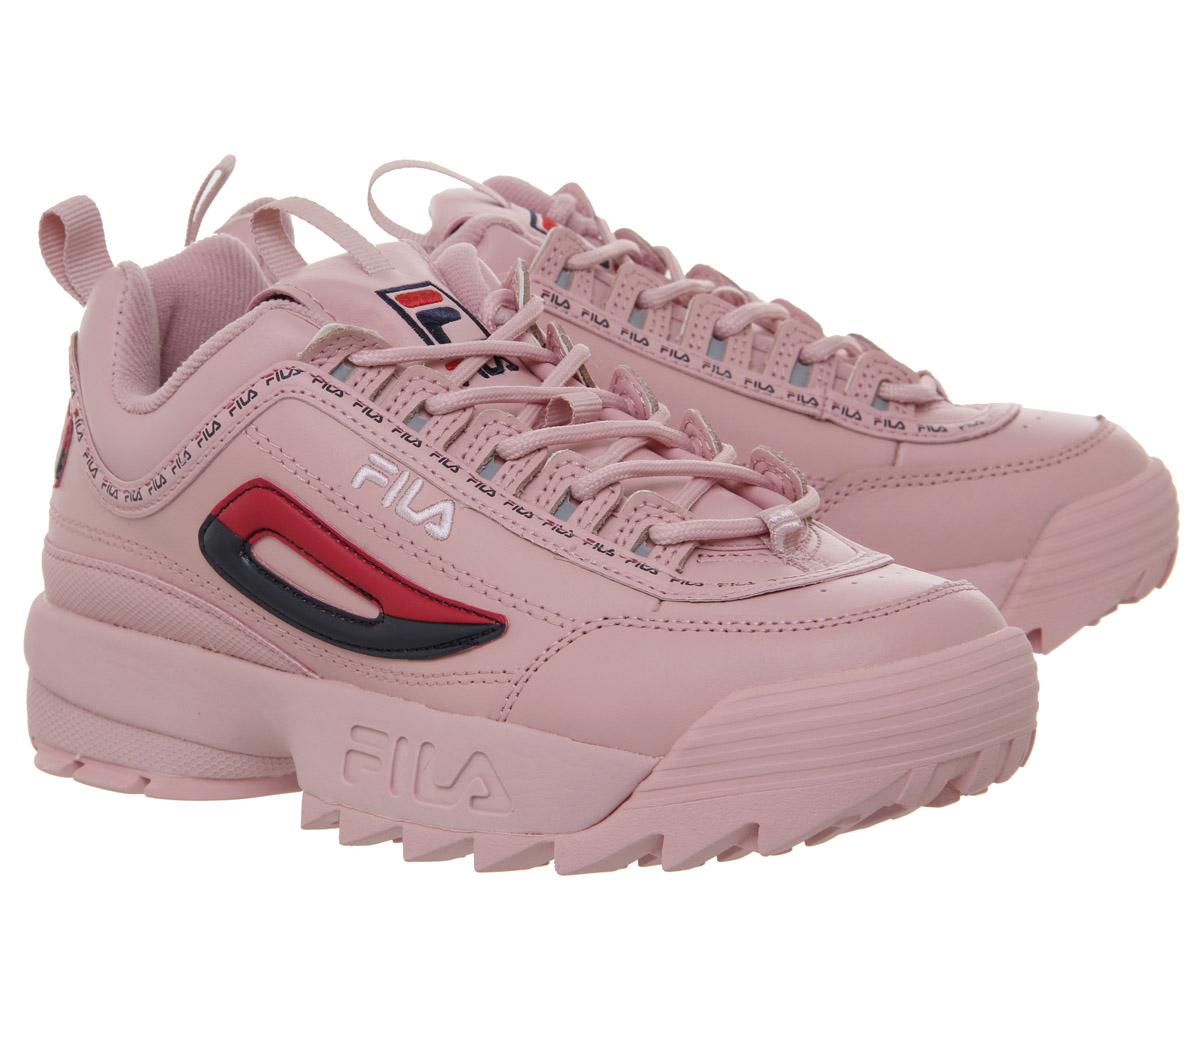 Fila Disruptor II Trainers Pink Shadow Fila Navy Red - Hers trainers